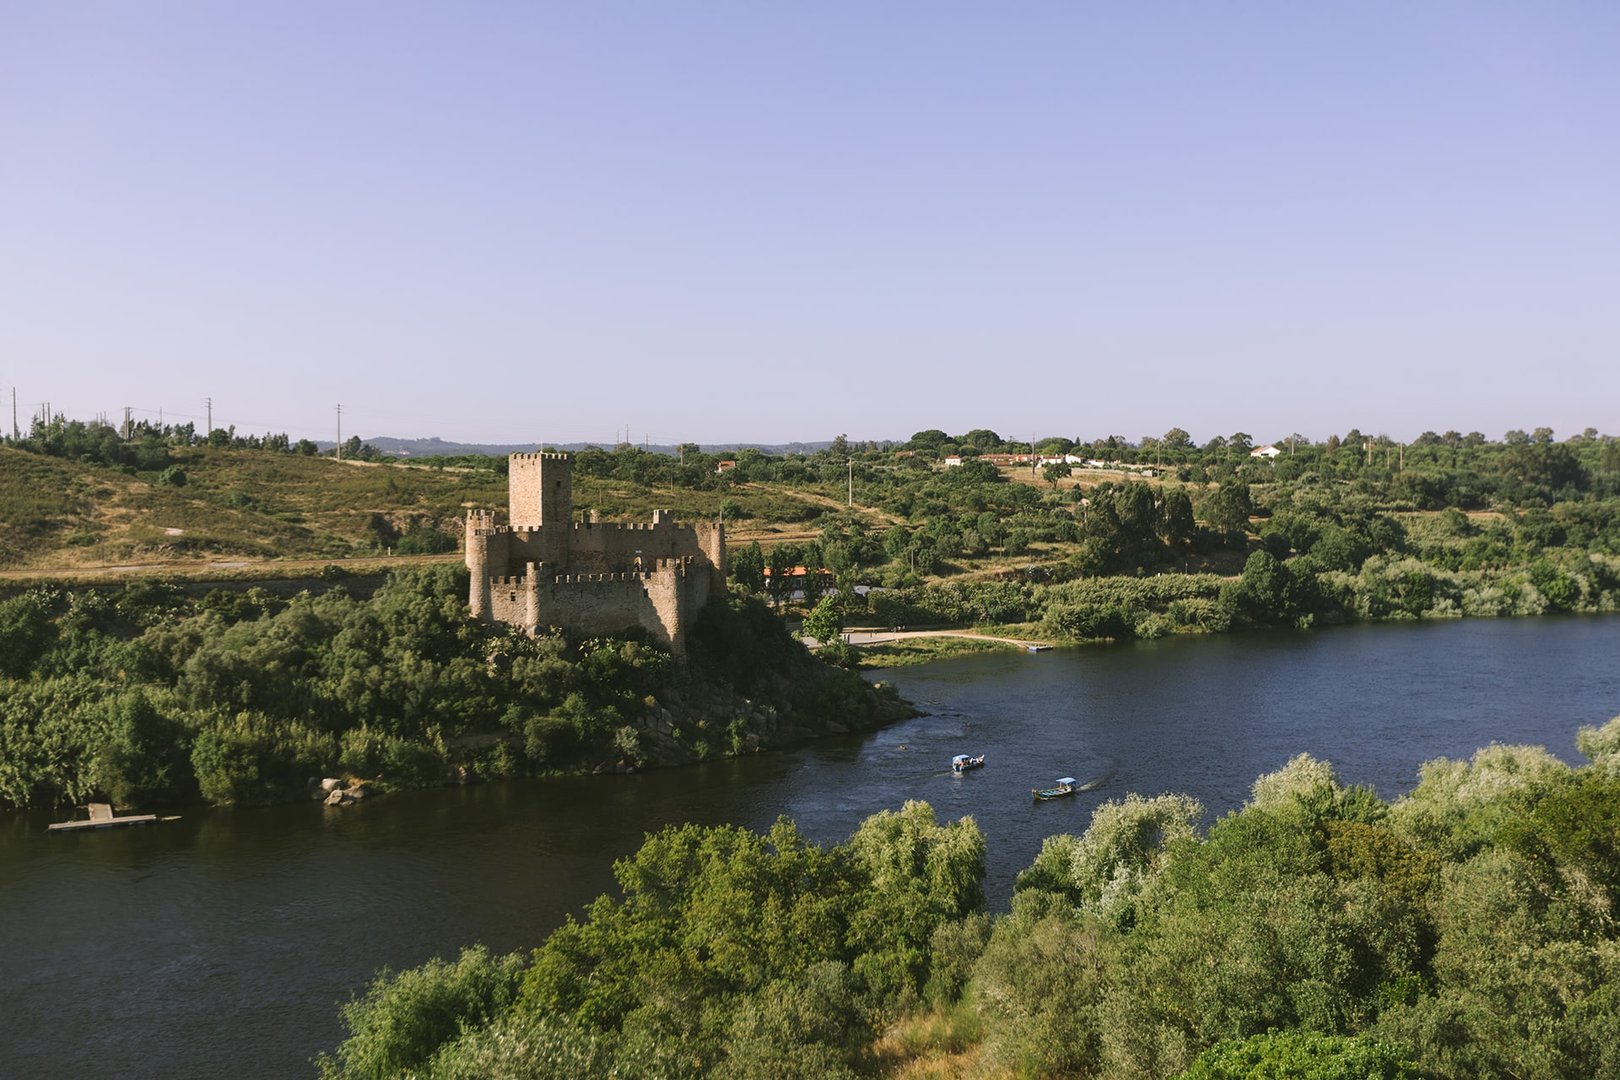 The Almourol Castle is an emblematic military monument of the Reconquest